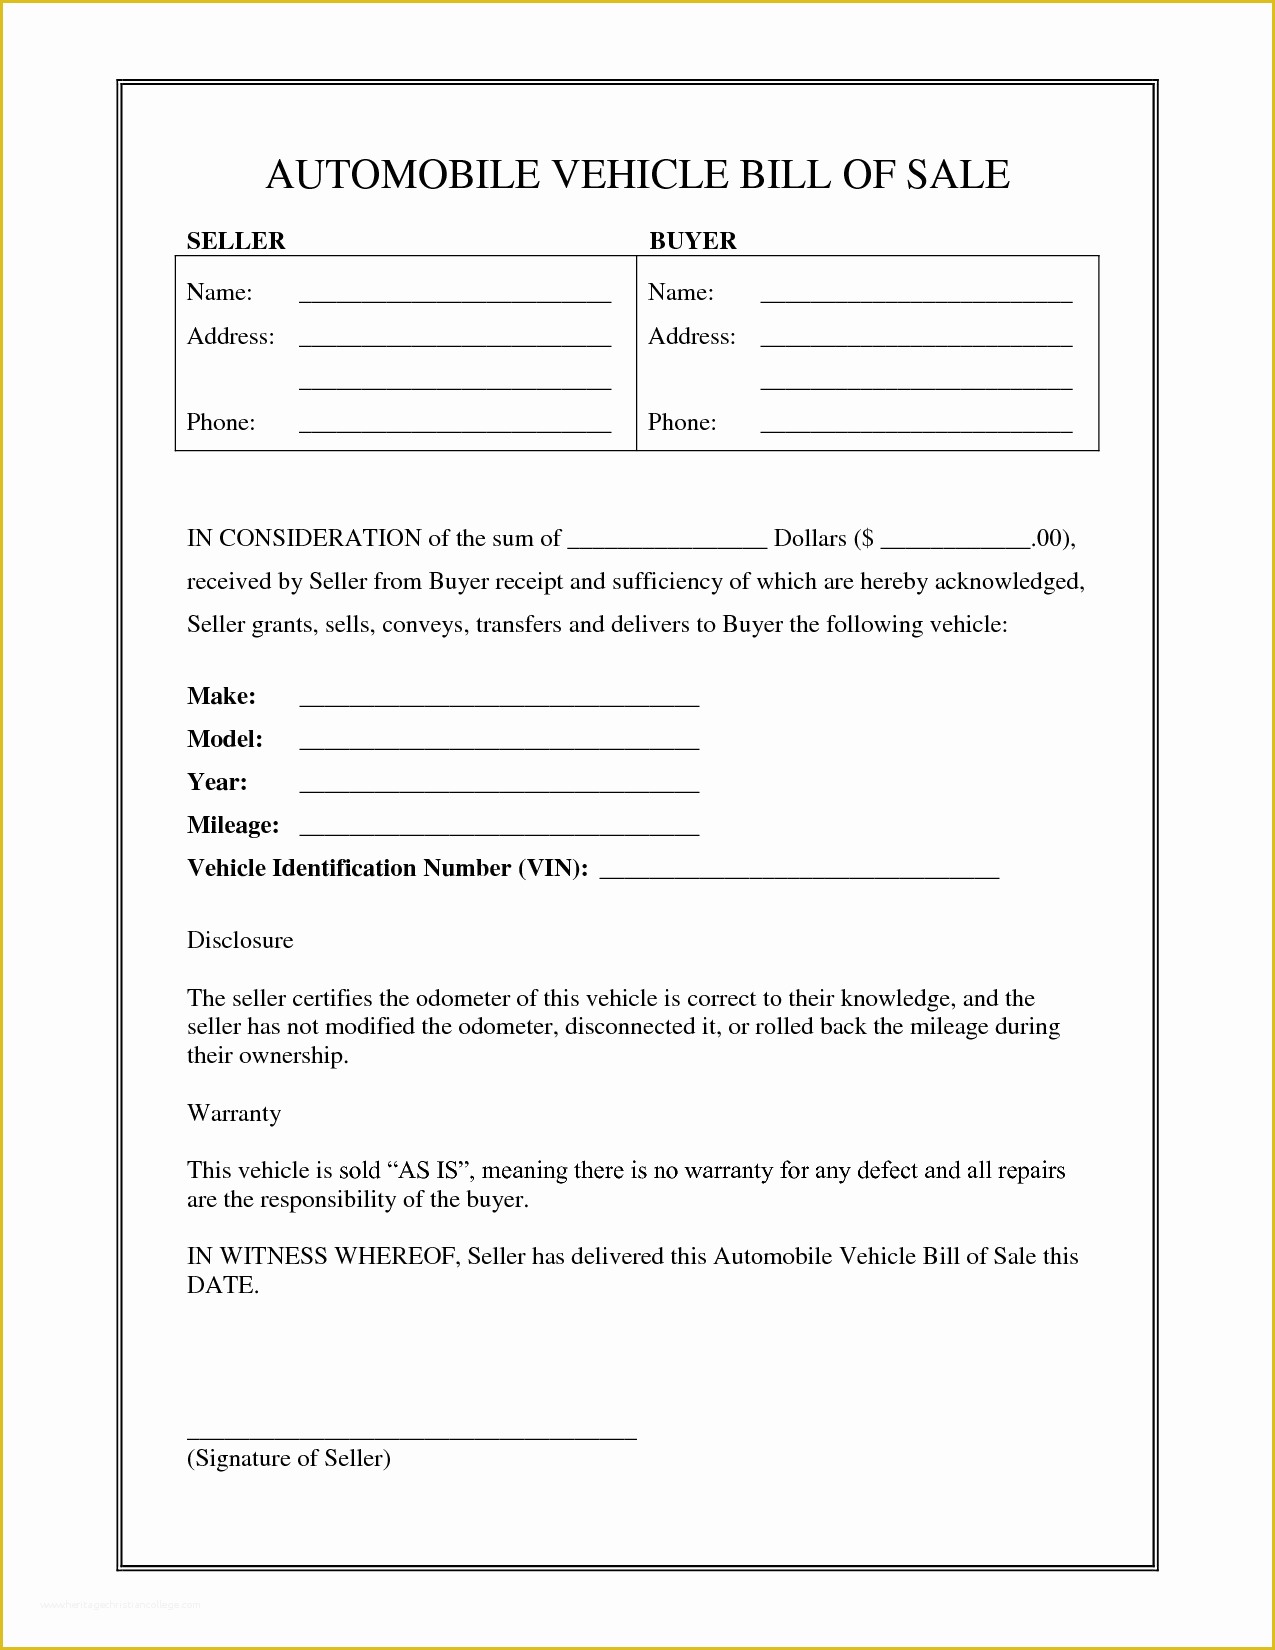 Free Vehicle Bill Of Sale Template Word Of Vehicle Bill Sale Free Printable Documents